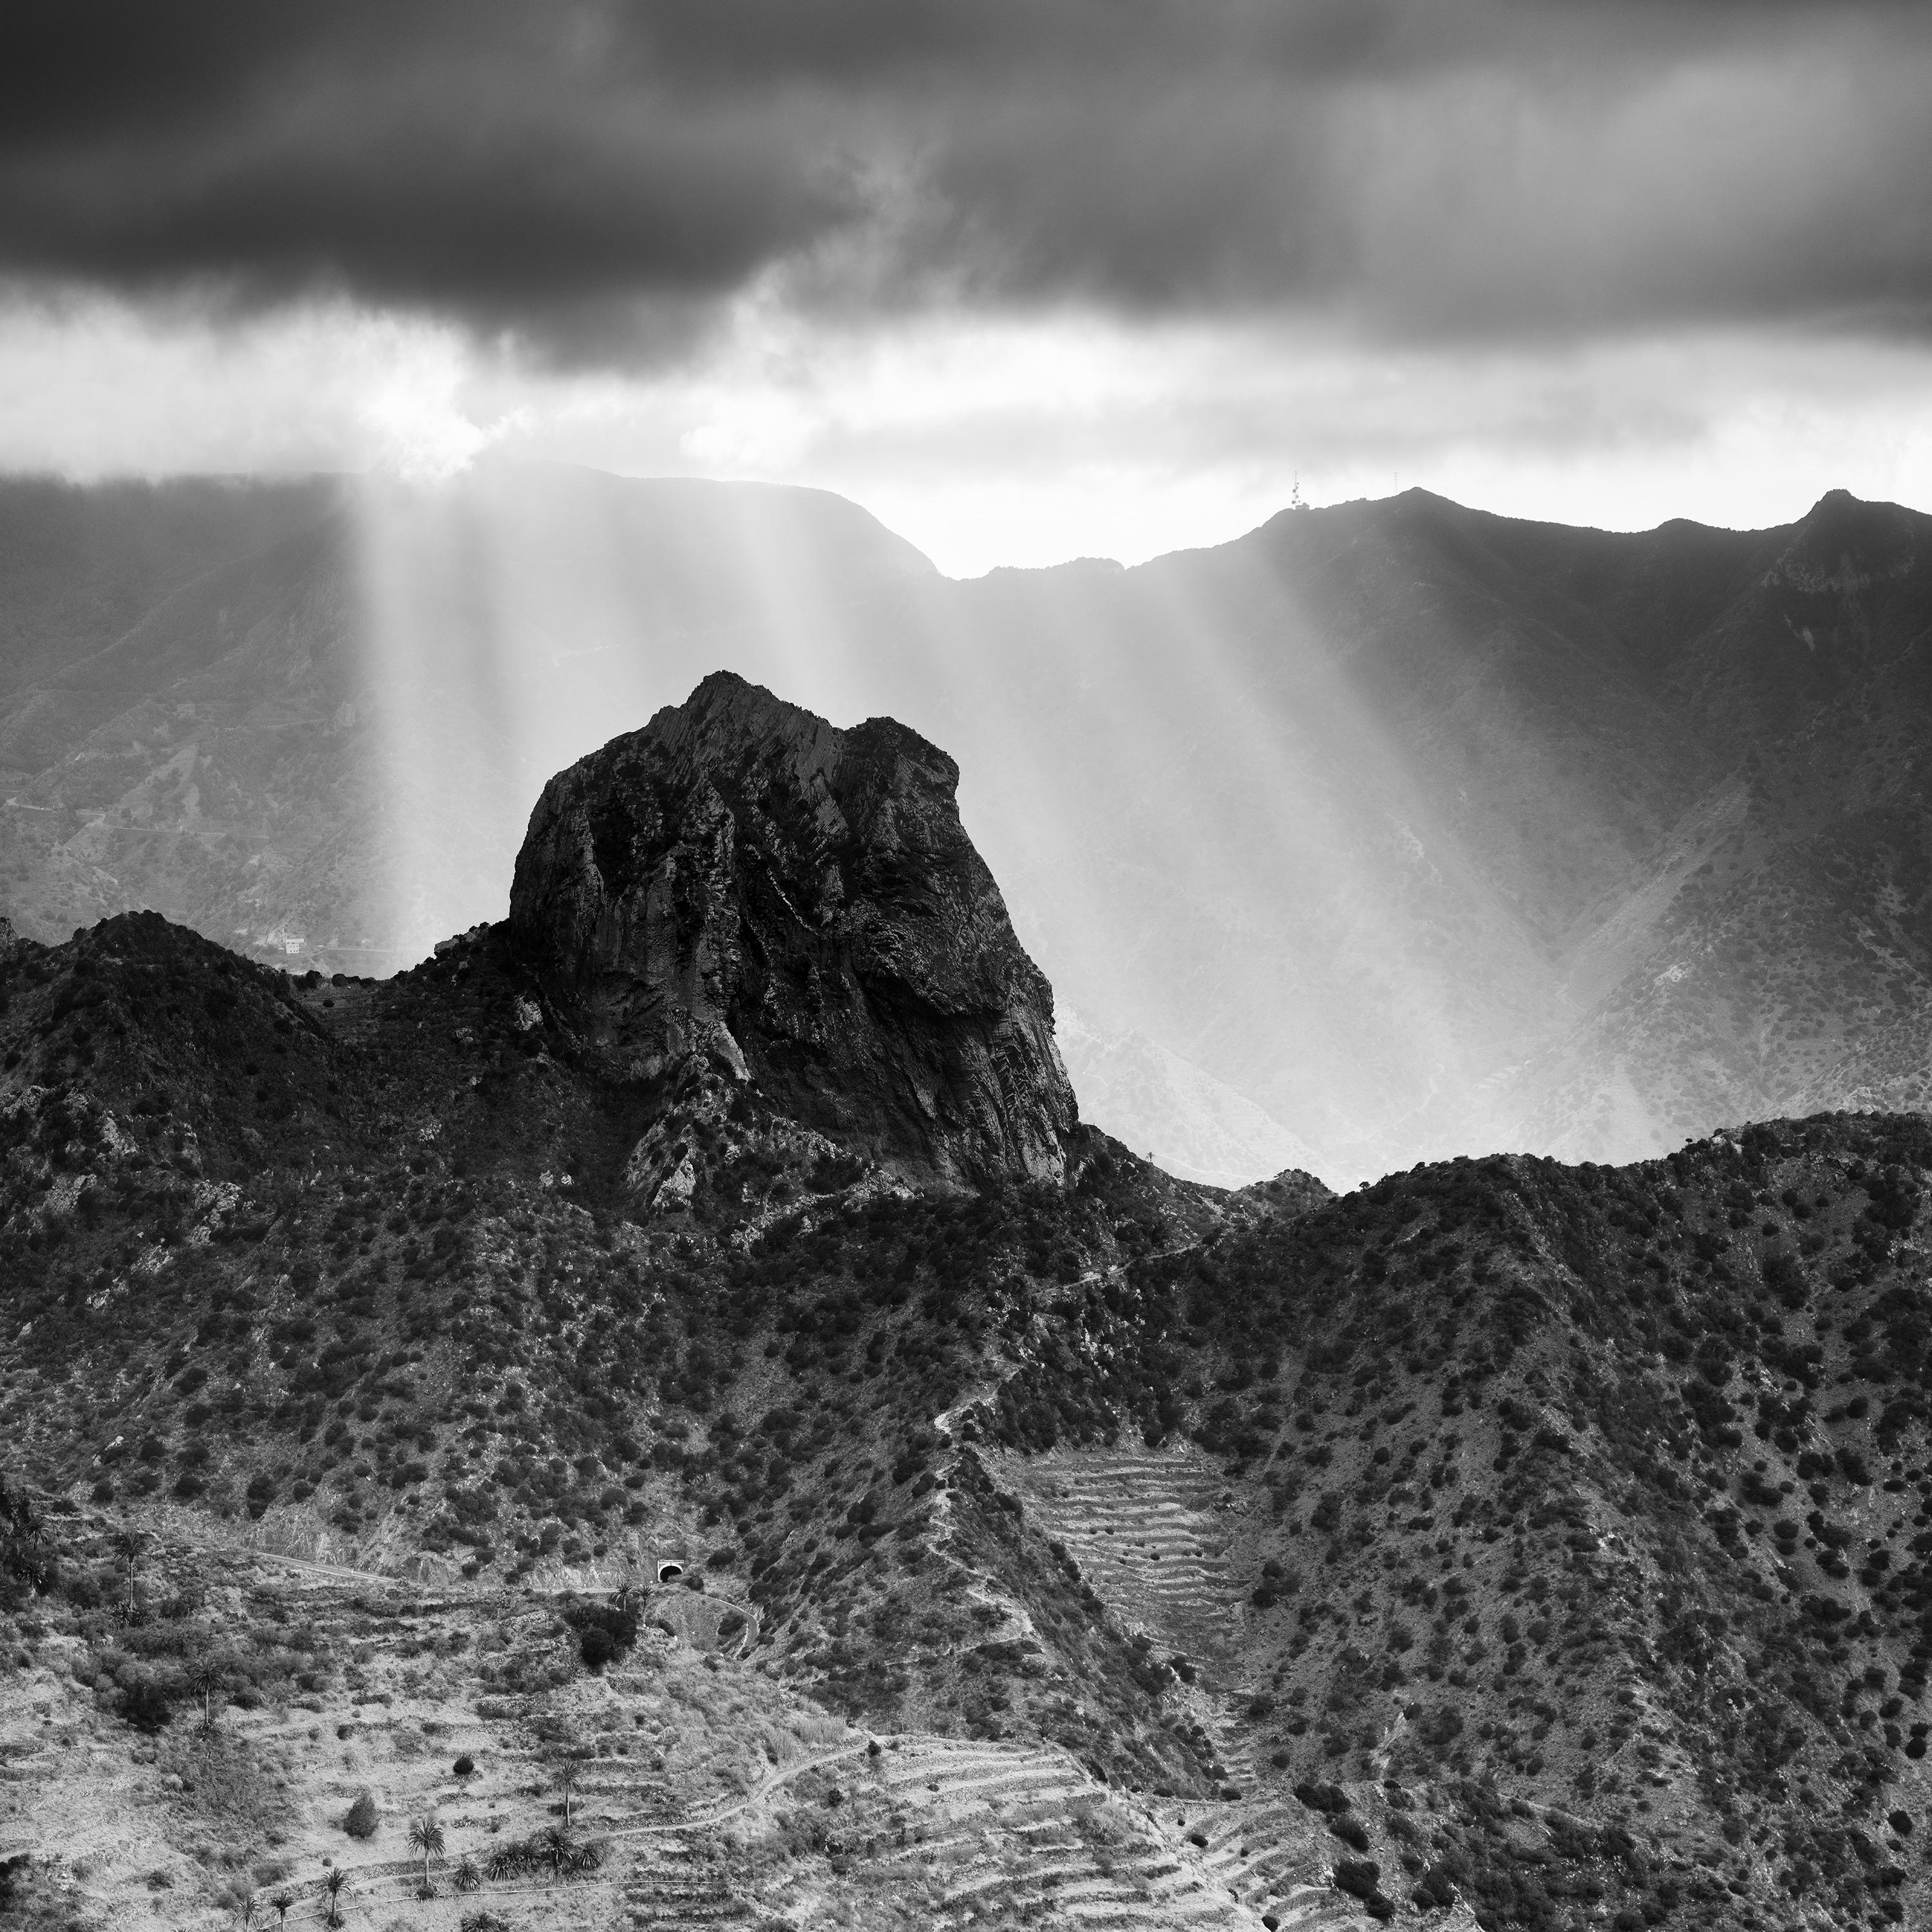 Black and White Fine Art Photography - Beautiful mood lighting in the mountains of La Gomera, Spain. Archival pigment ink print, edition of 8. Signed, titled, dated and numbered by artist. Certificate of authenticity included. Printed with 4cm white